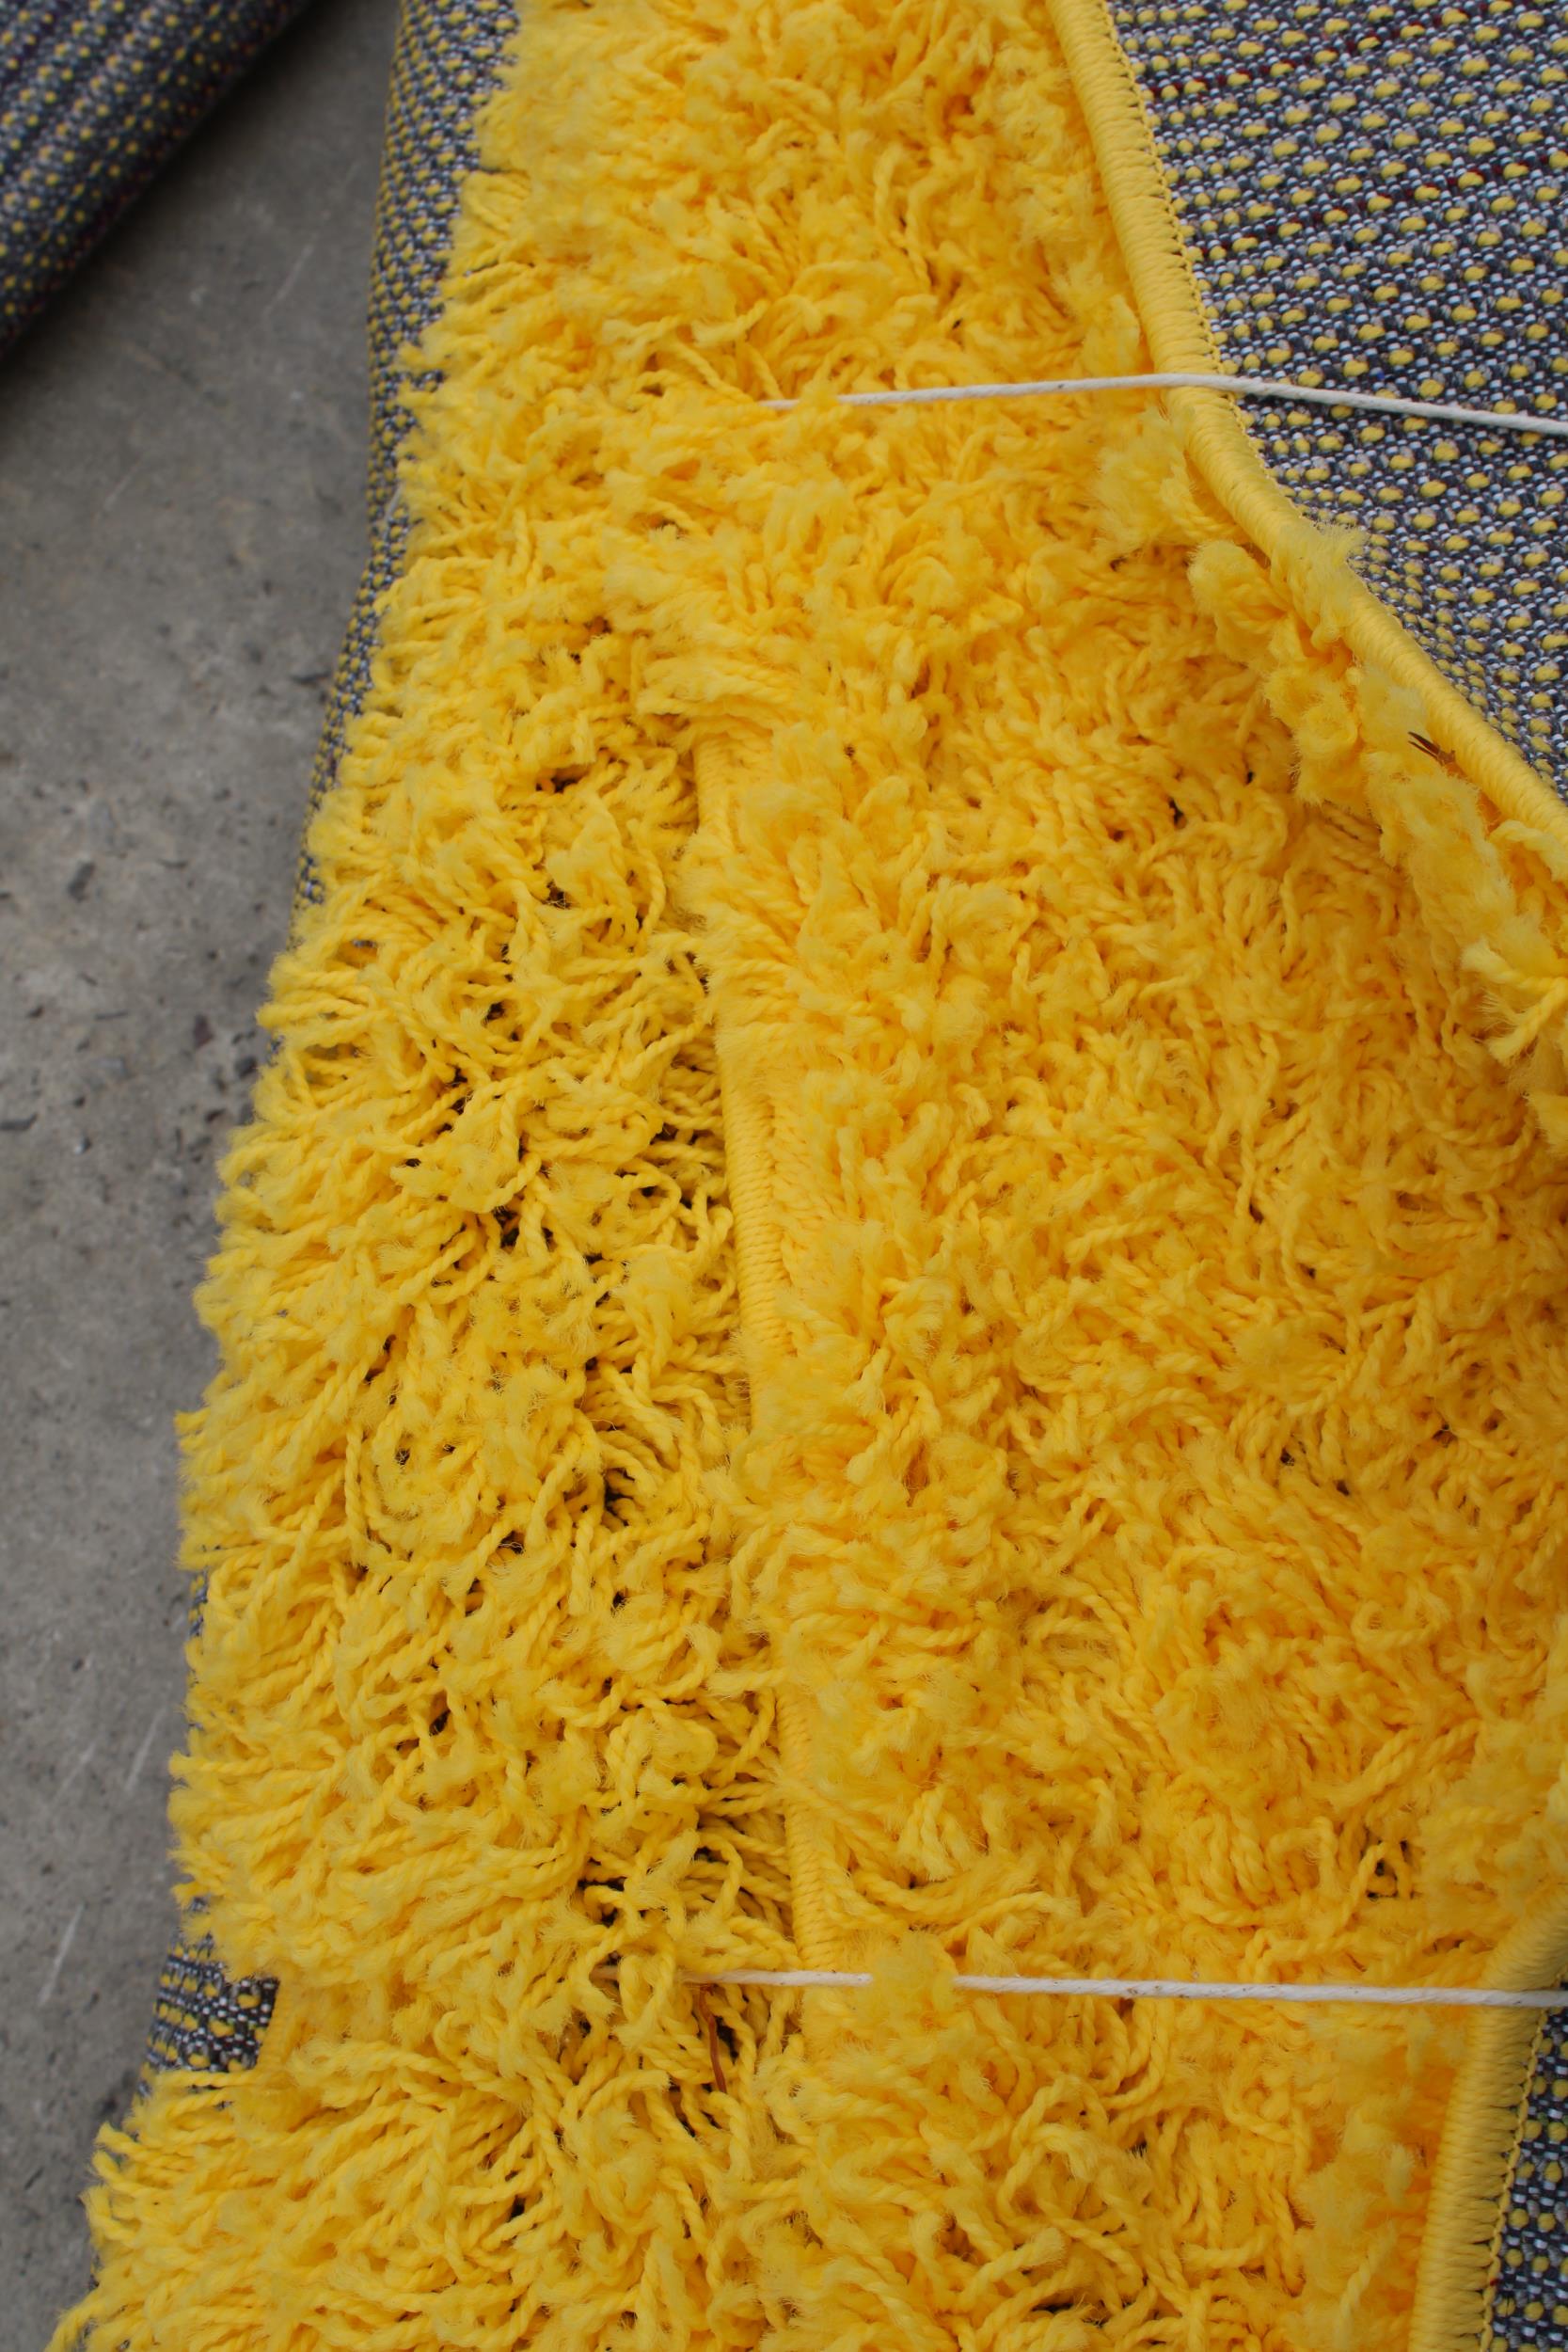 A BELIEVED AS NEW MADE IN TURKEY YELLOW SHAGGY RUG - Image 2 of 2